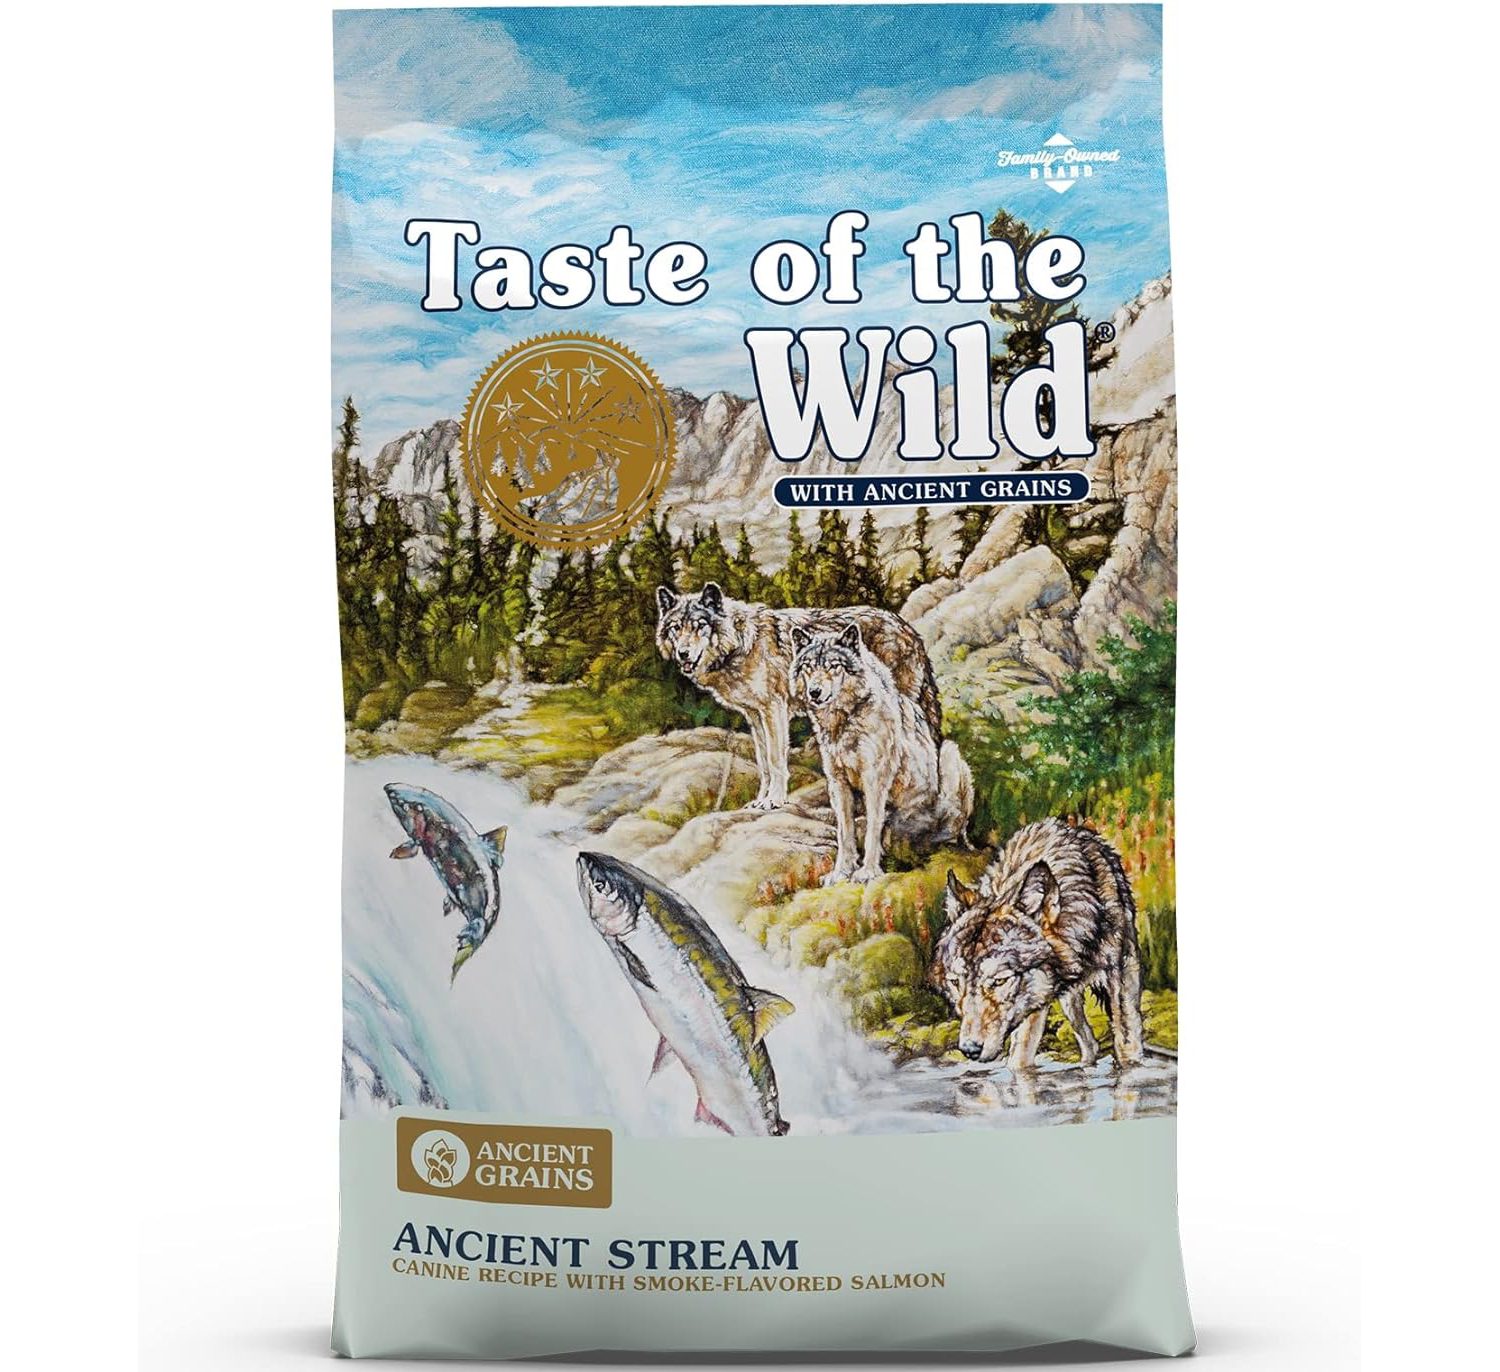 Taste of the Wild Ancient Streams with Ancient Grains